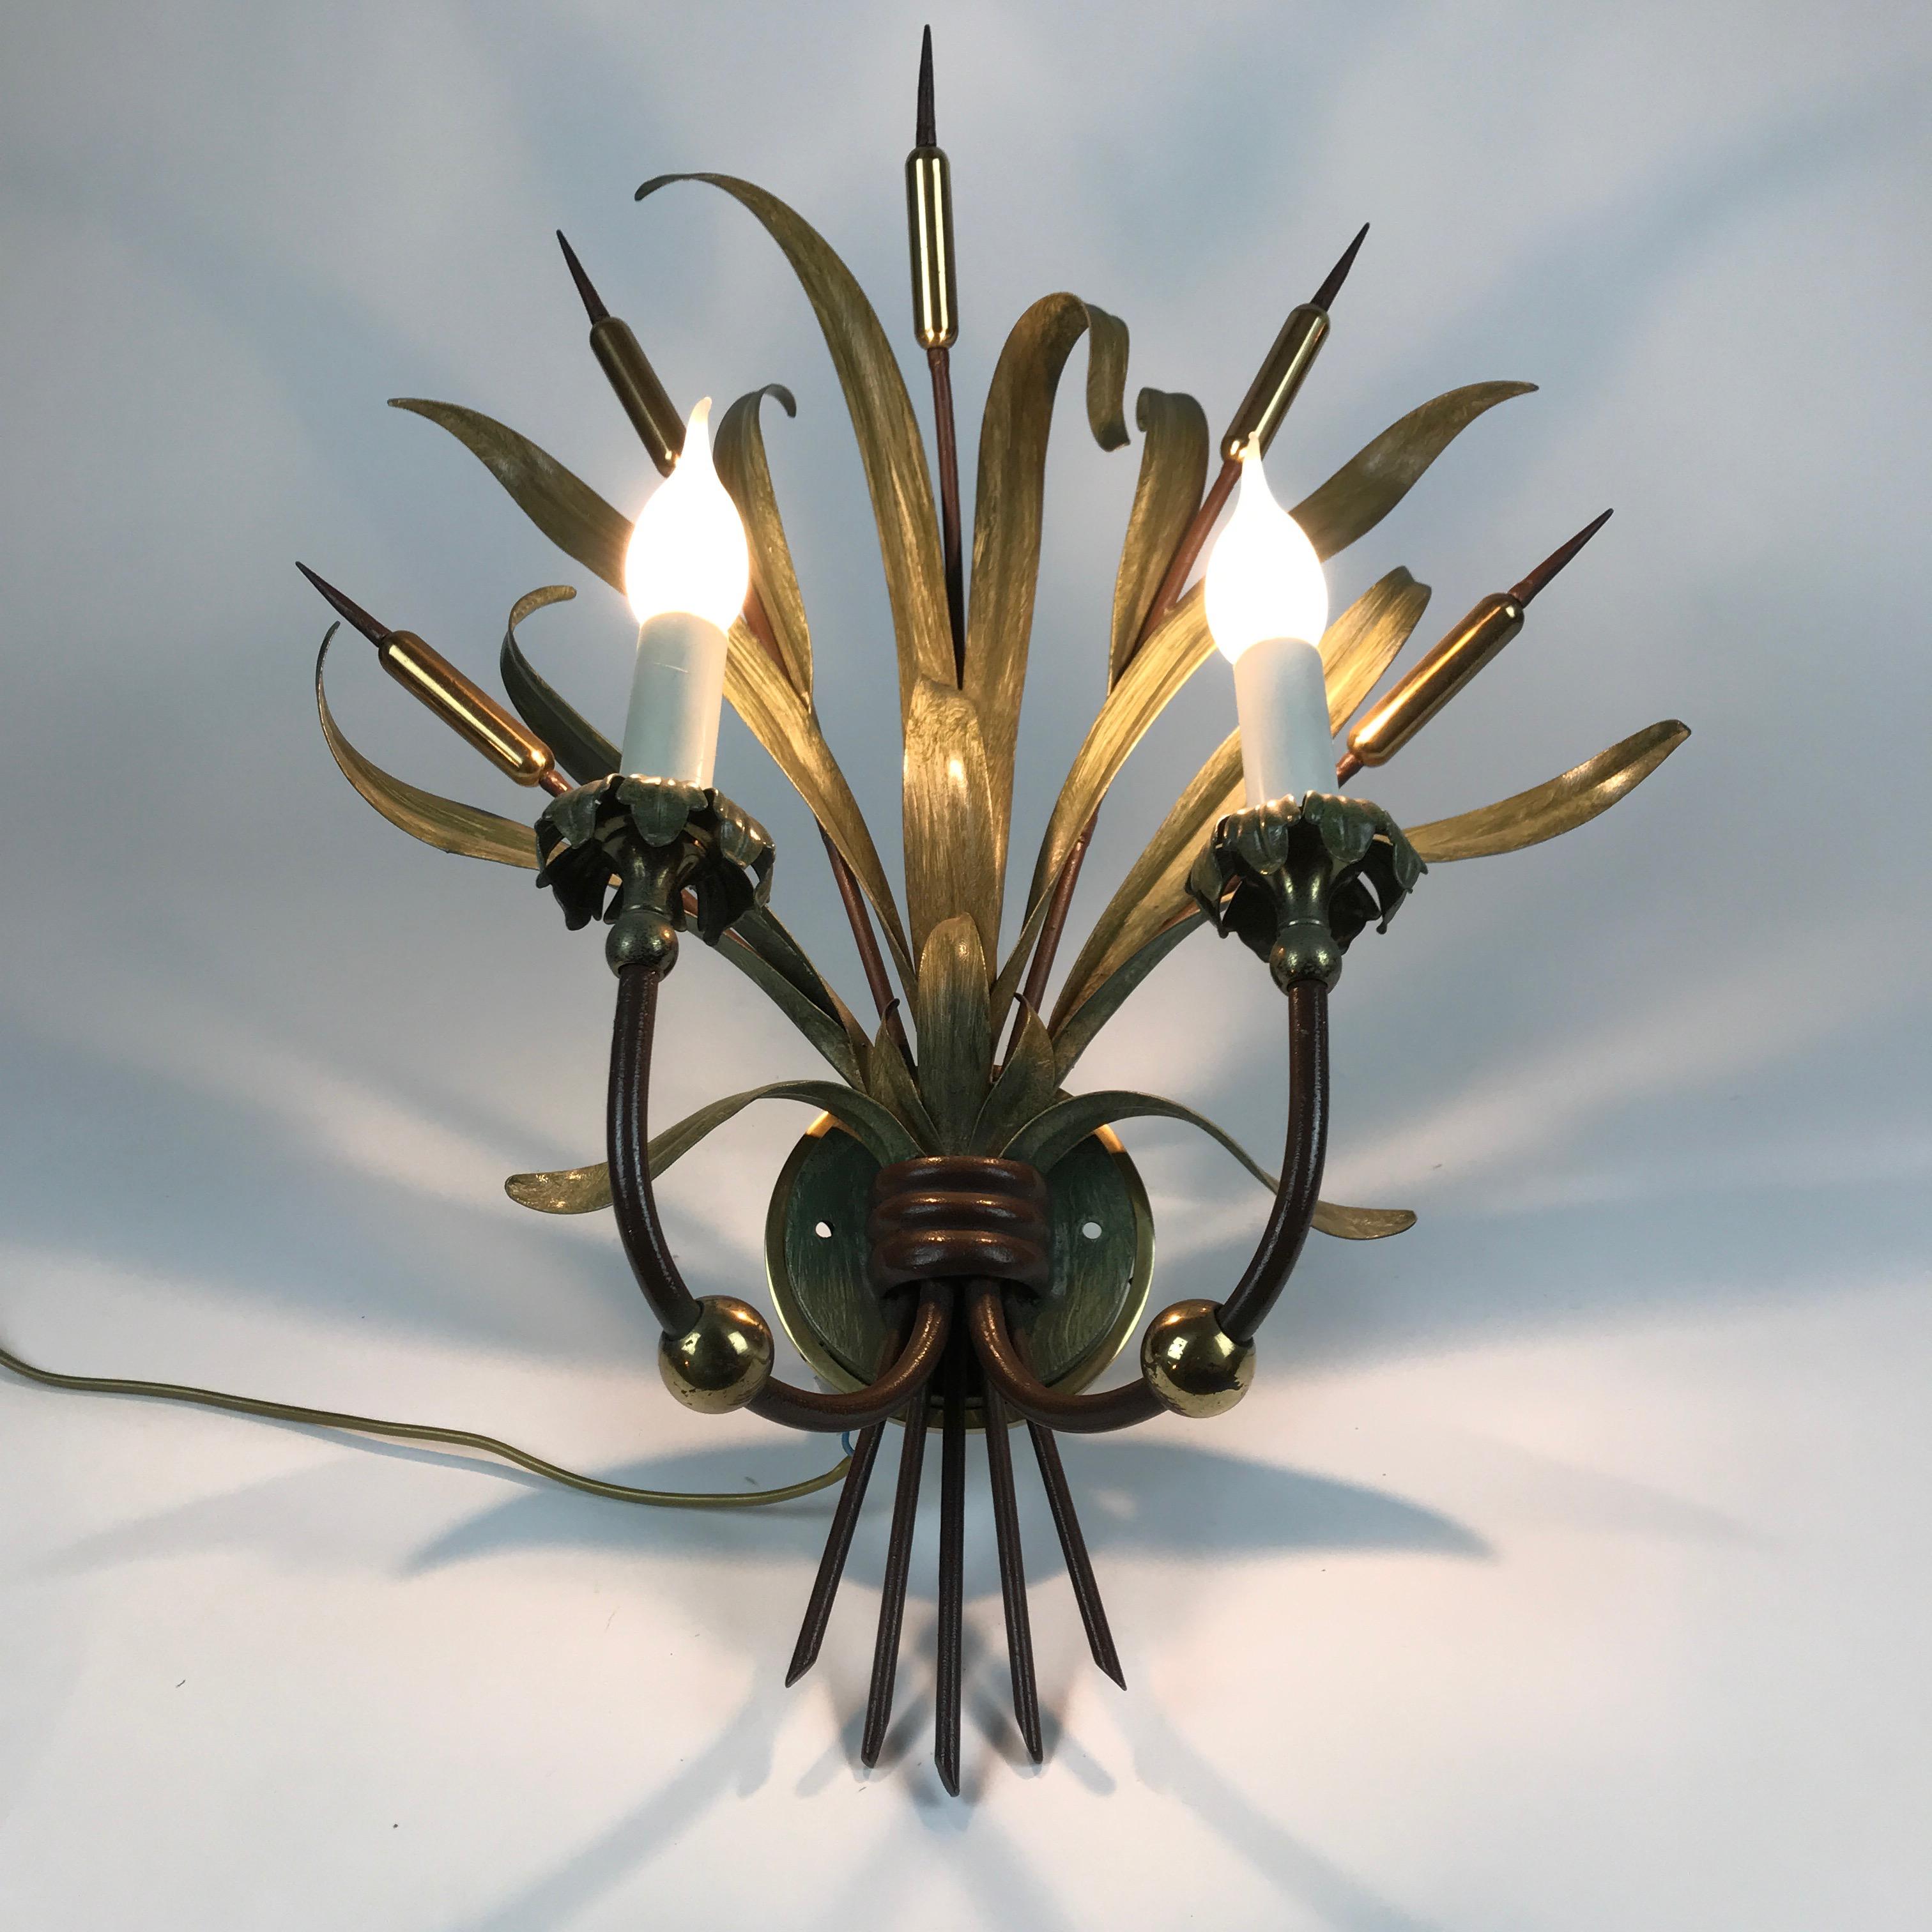 Hand-Painted Pair of Italian Sconces by Banci Firenze 1980 circa with Green Reed Bunches 